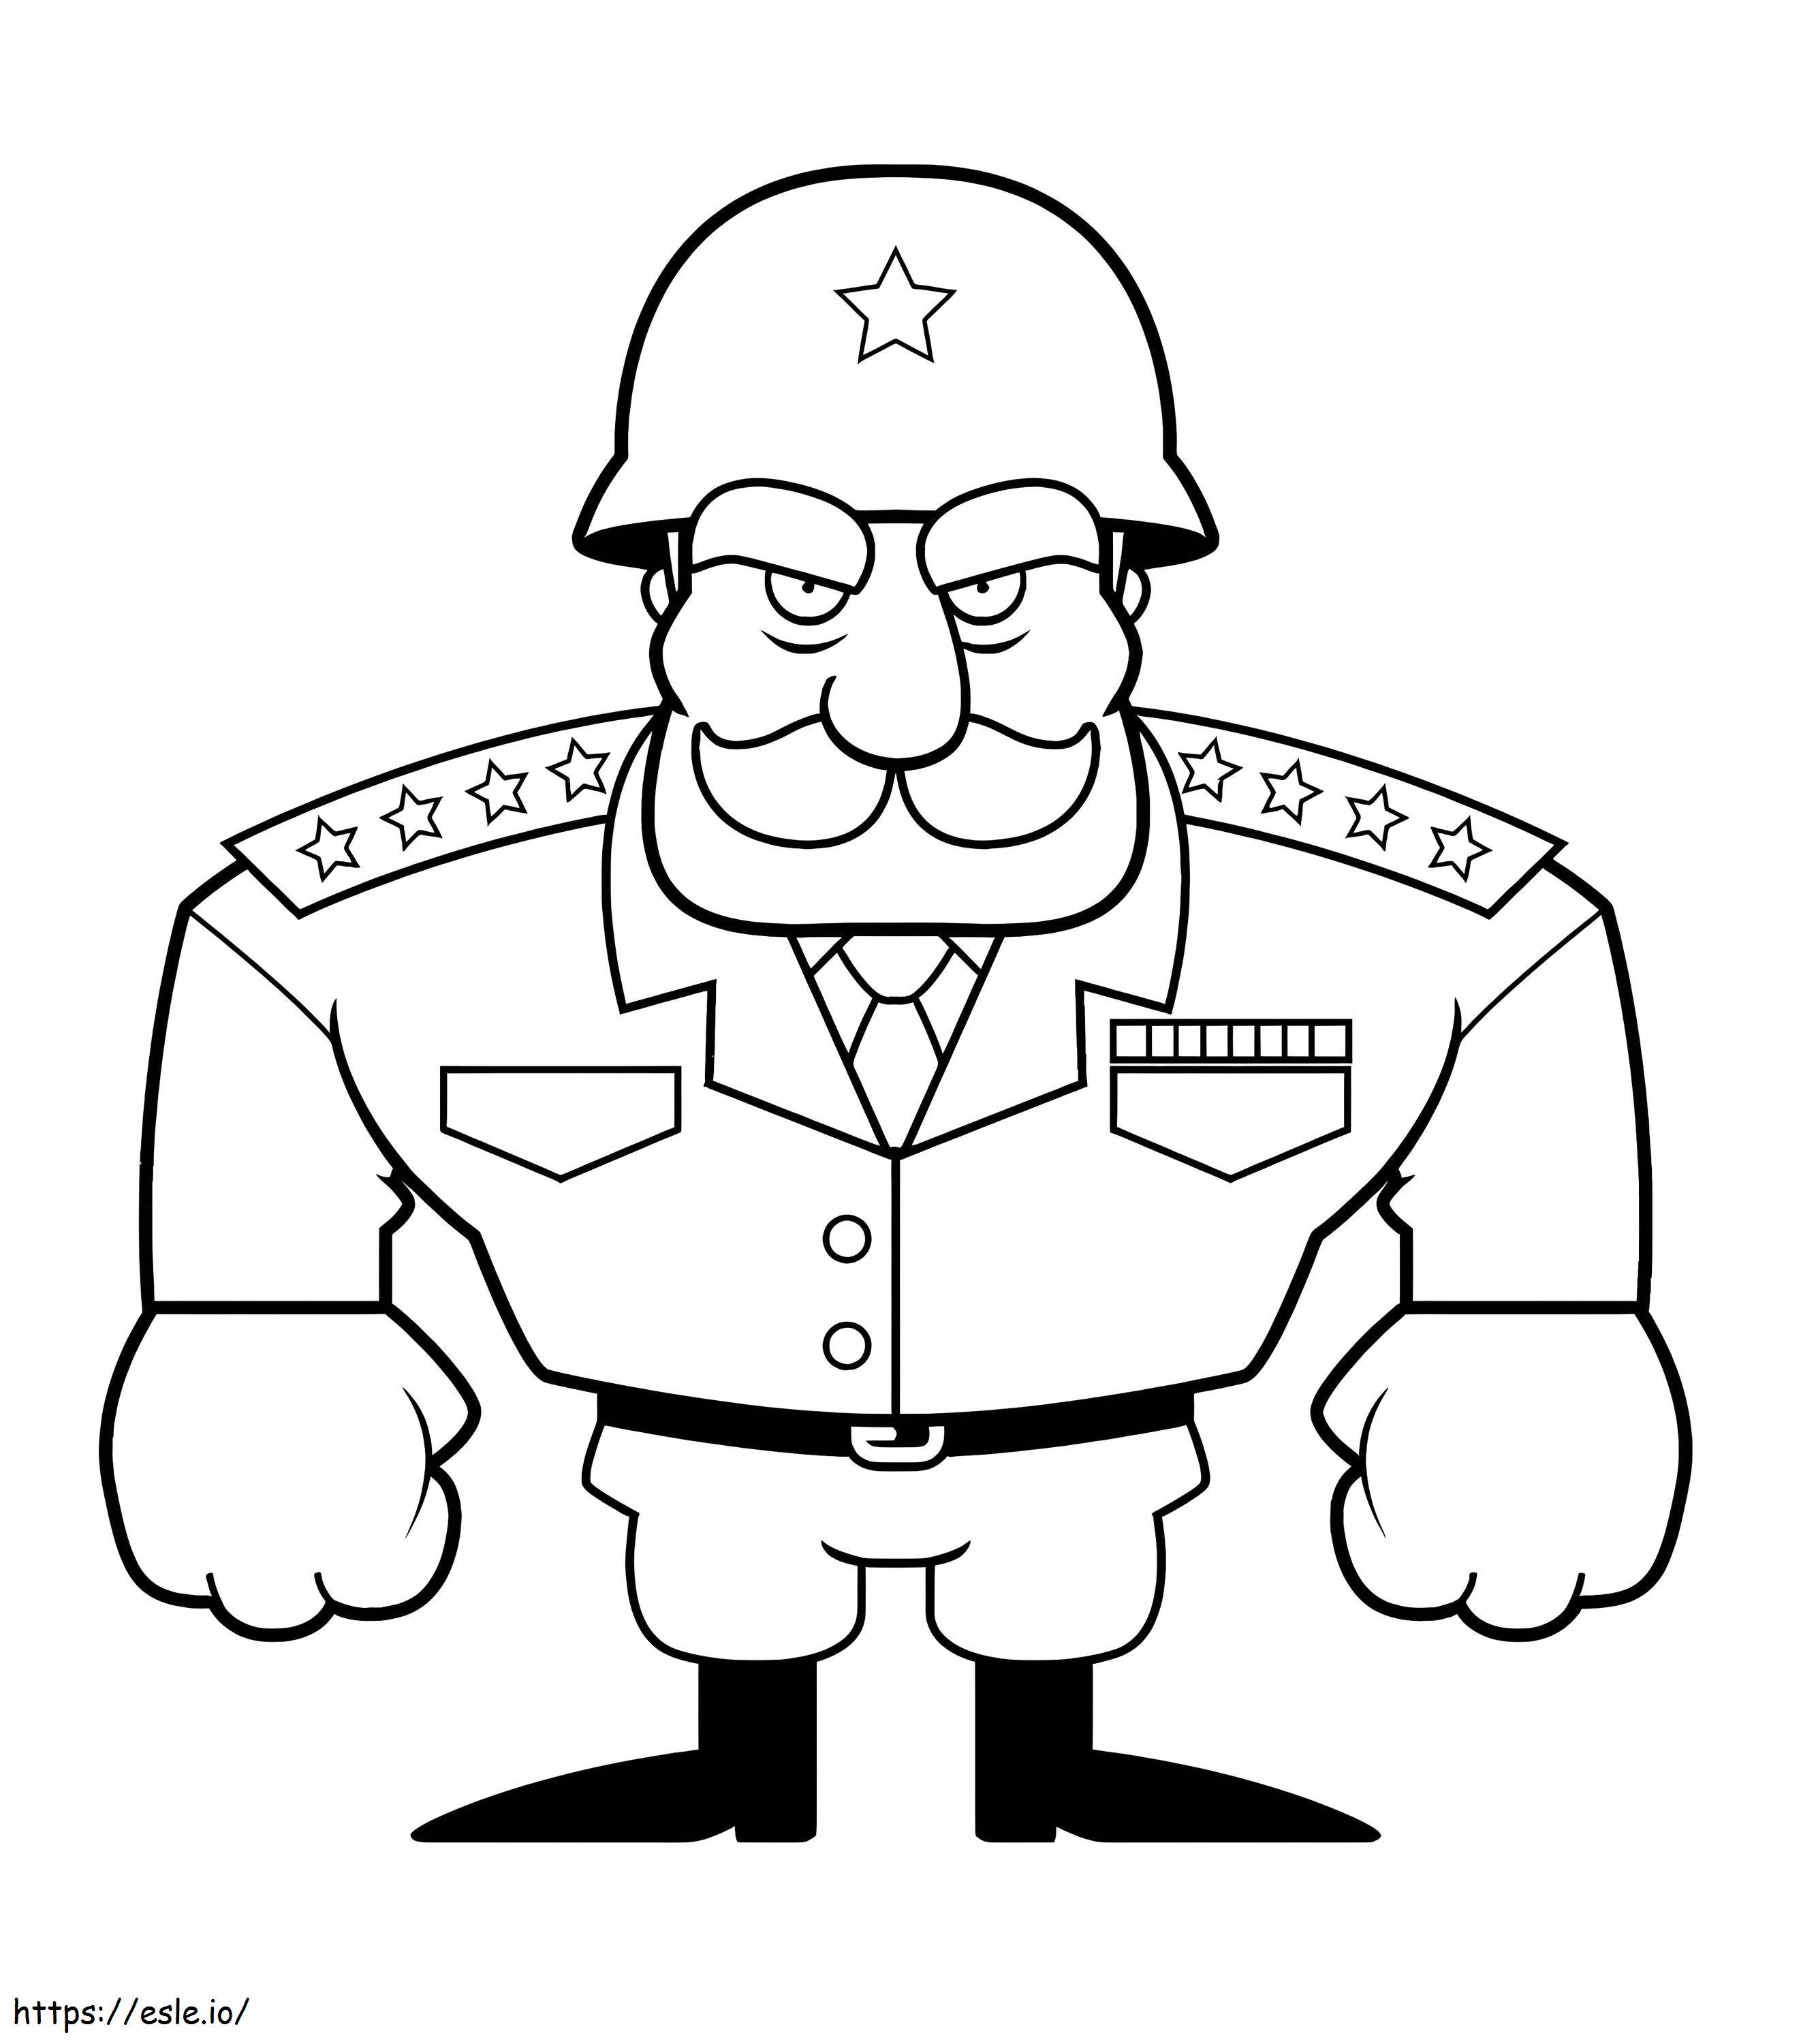 Cool Cartoon Soldier coloring page